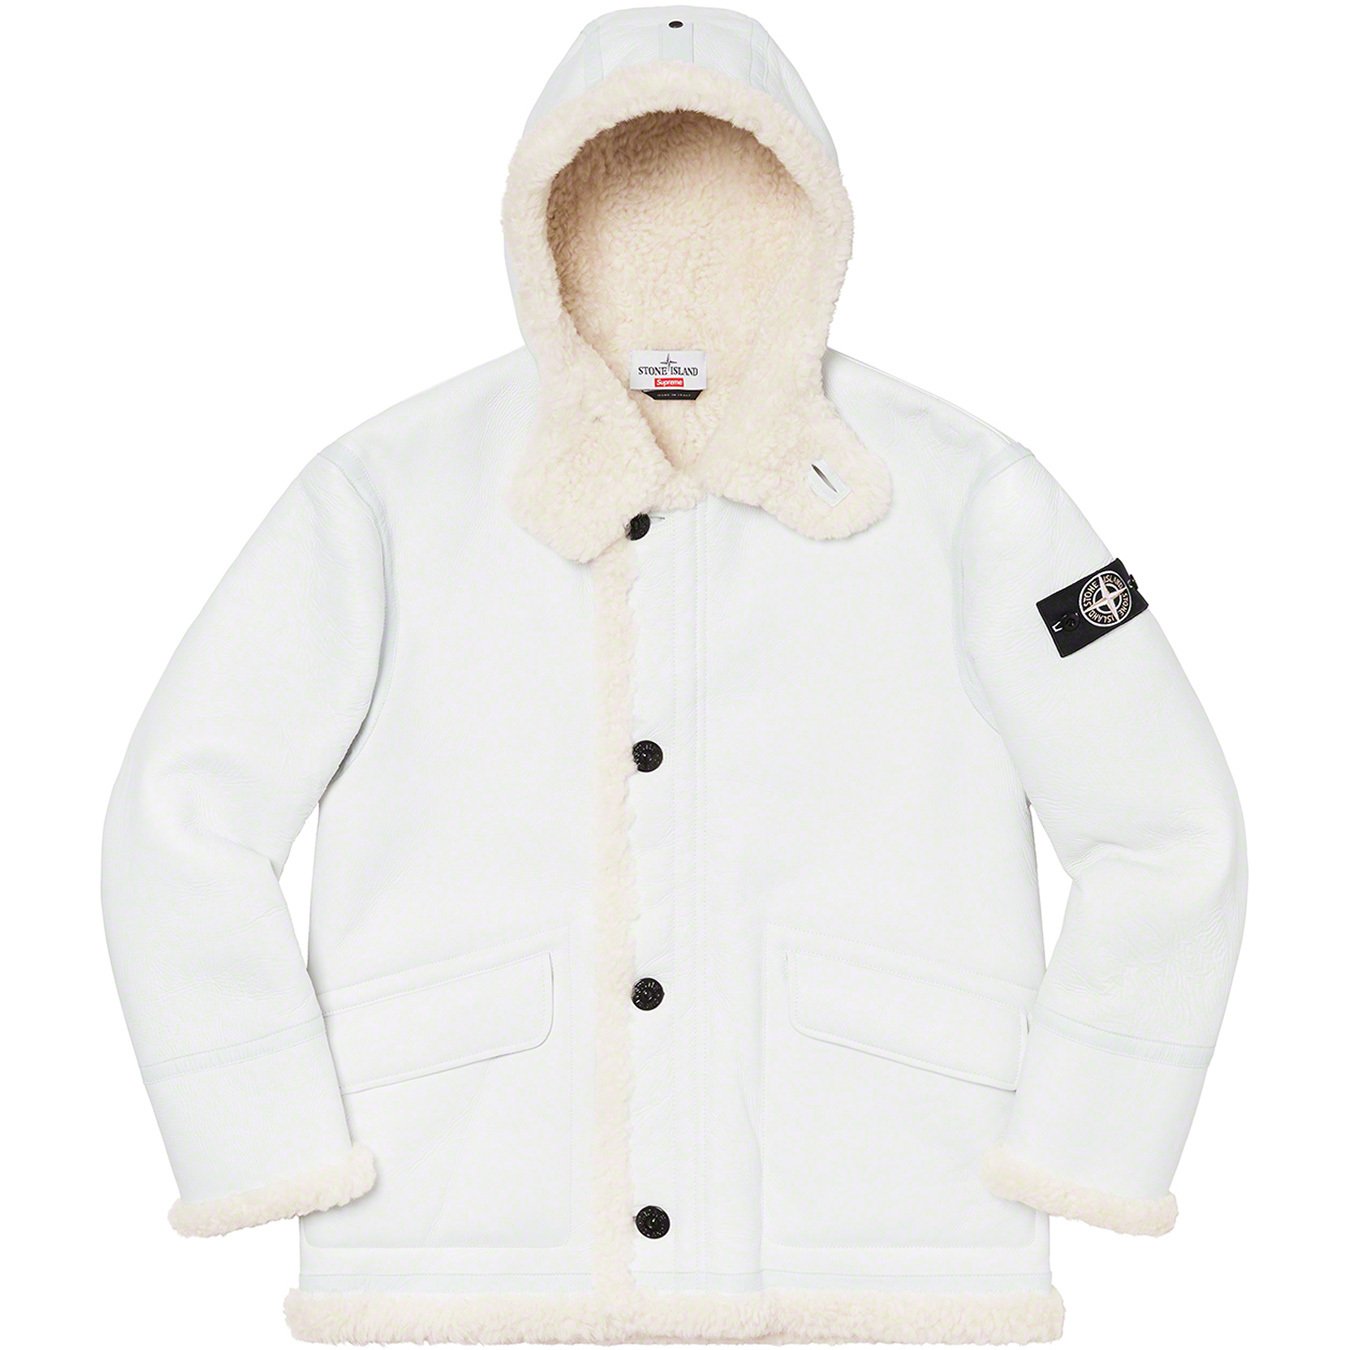 Stone Island Hand-Painted Hooded Shearling Jacket - fall winter 2020